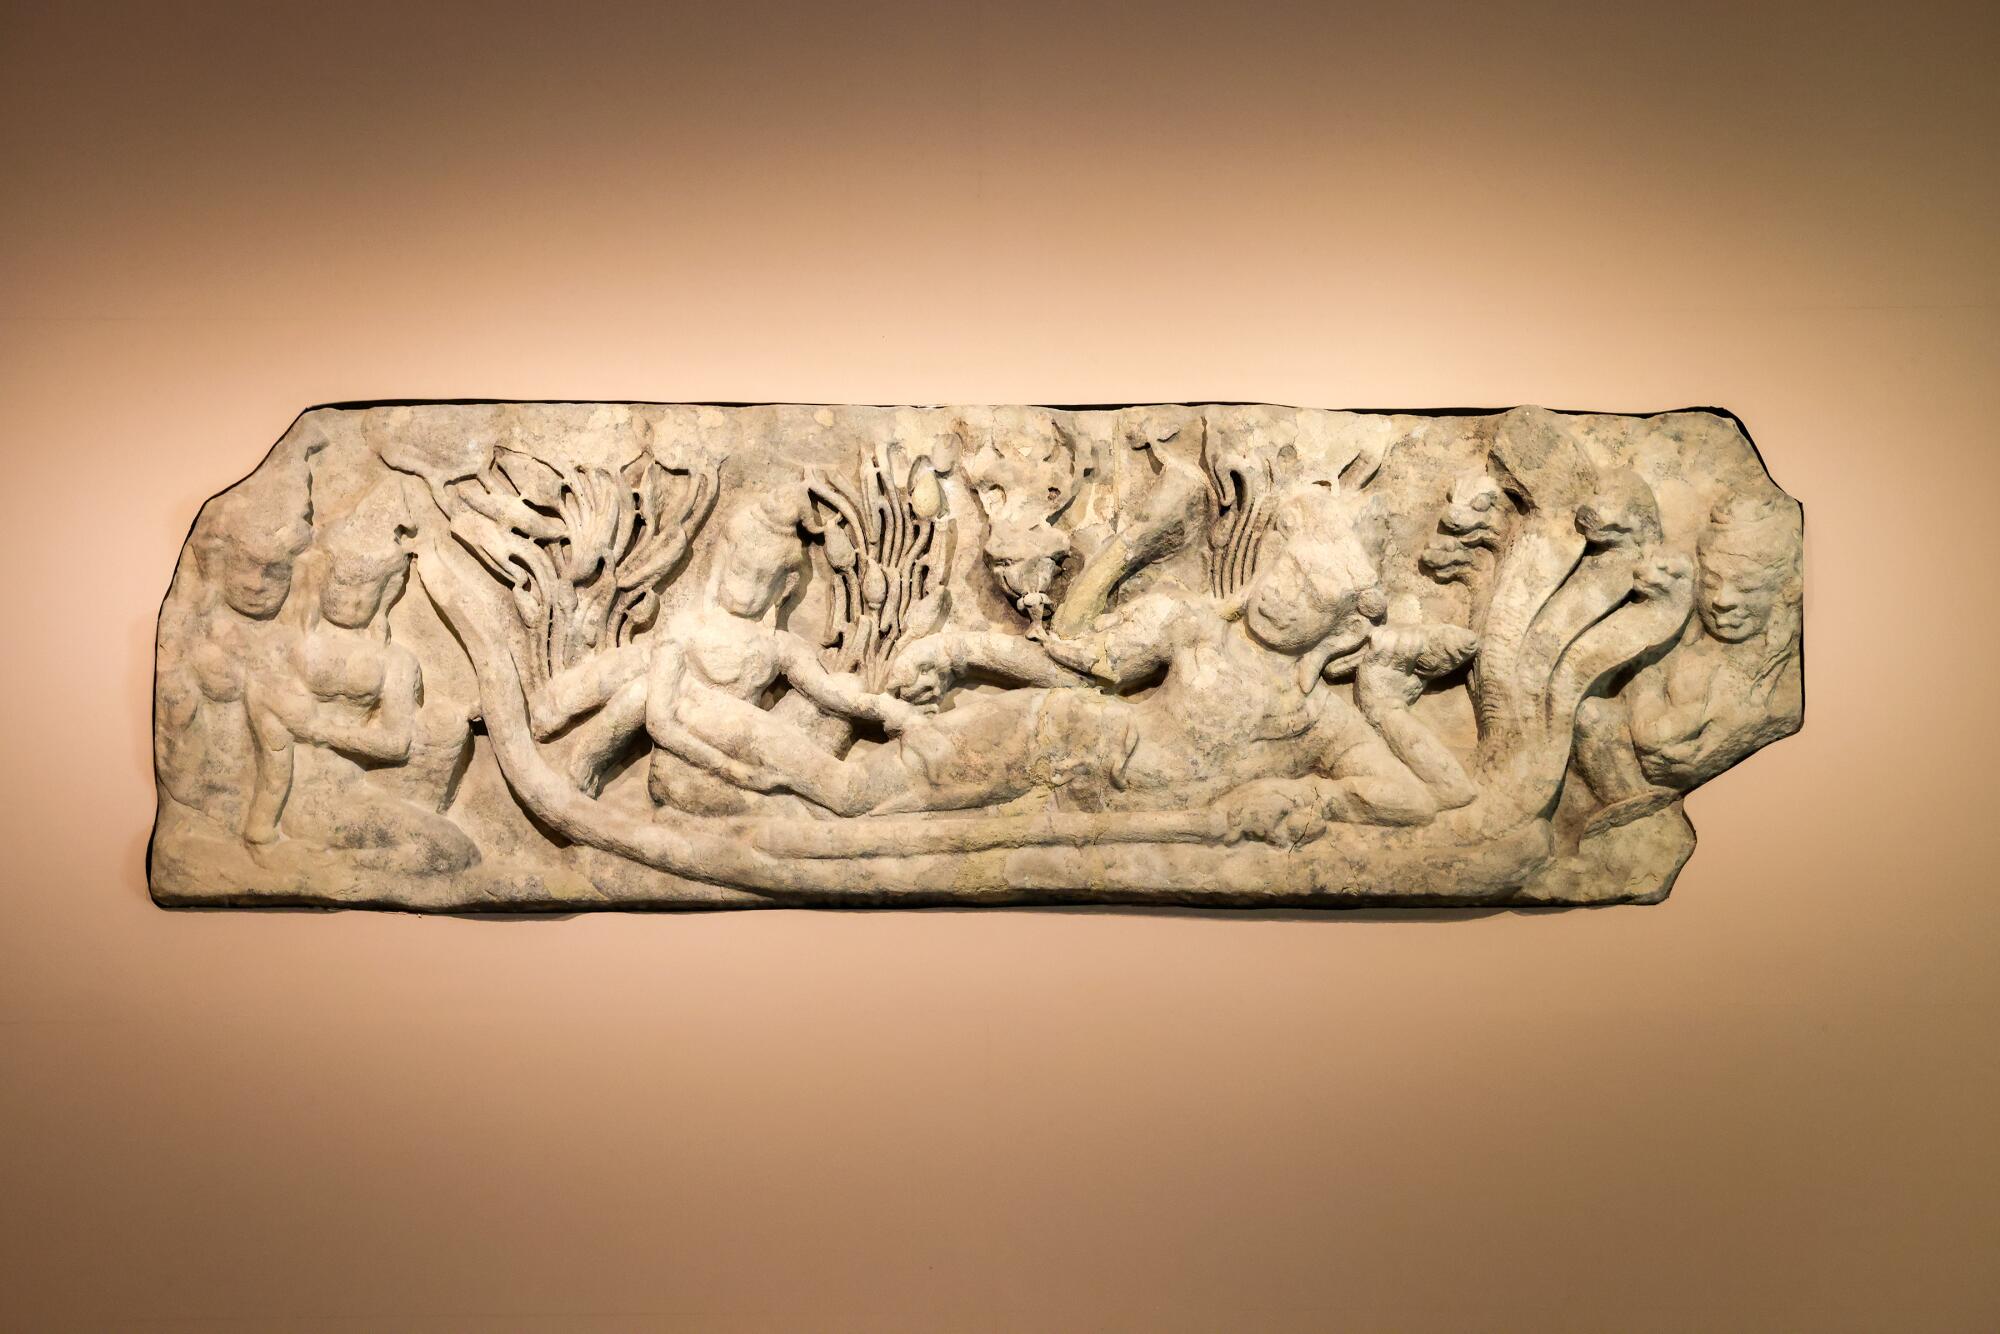 The Lintel with Reclining Vishnu and Retinue at the Norton Simon Museum on Monday, 